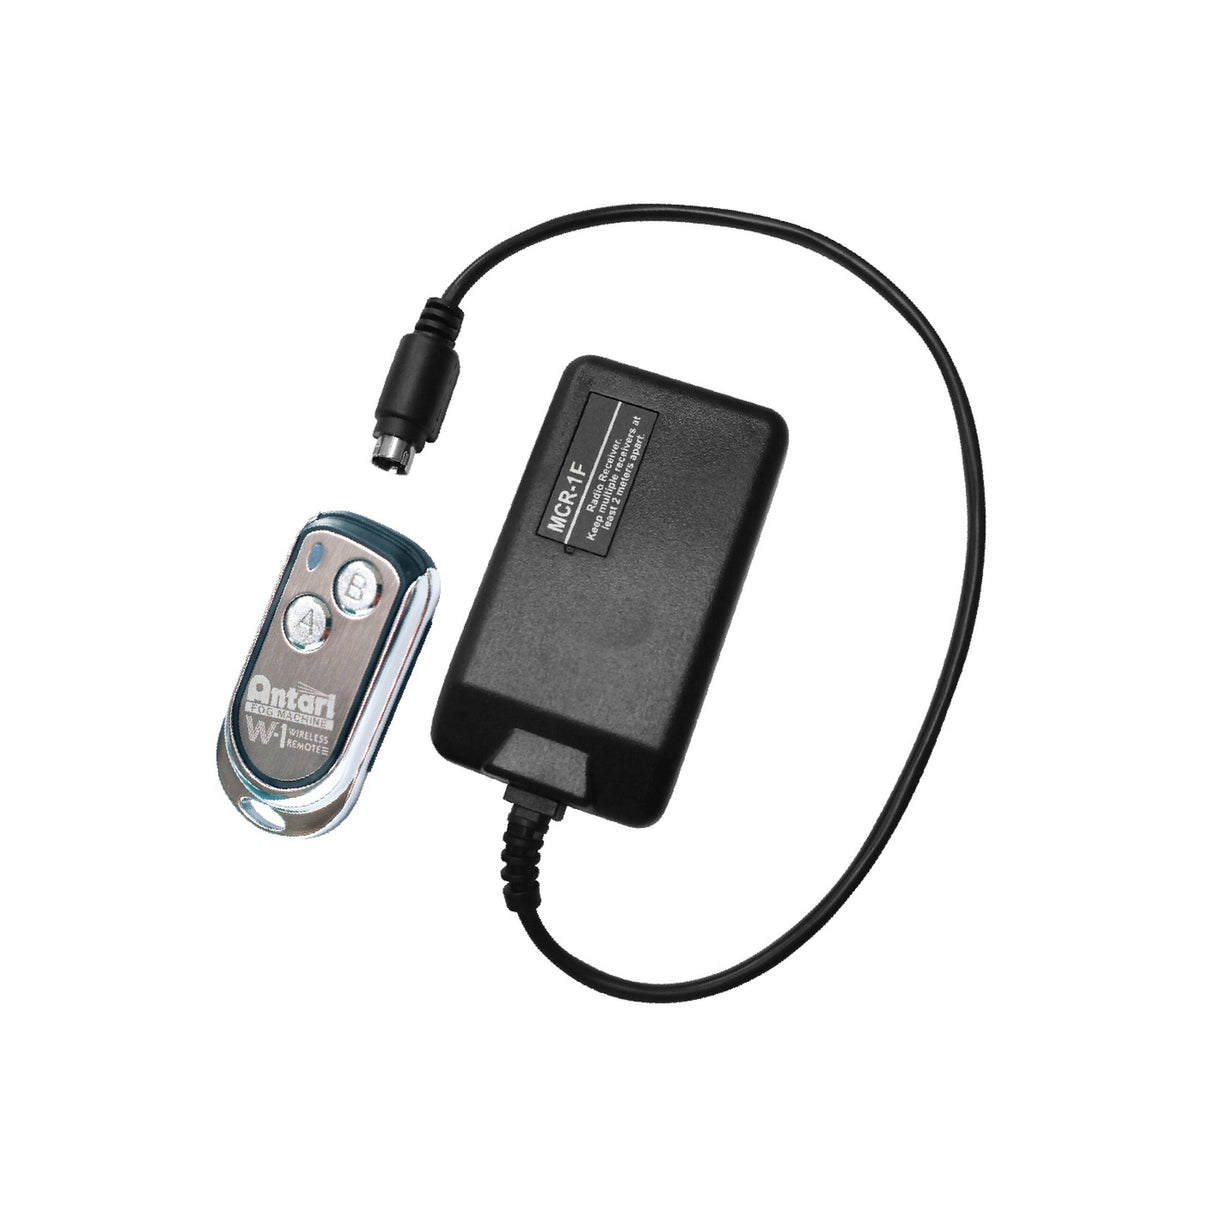 Antari MCR-1F Wireless Remote for M-1 and MB-1